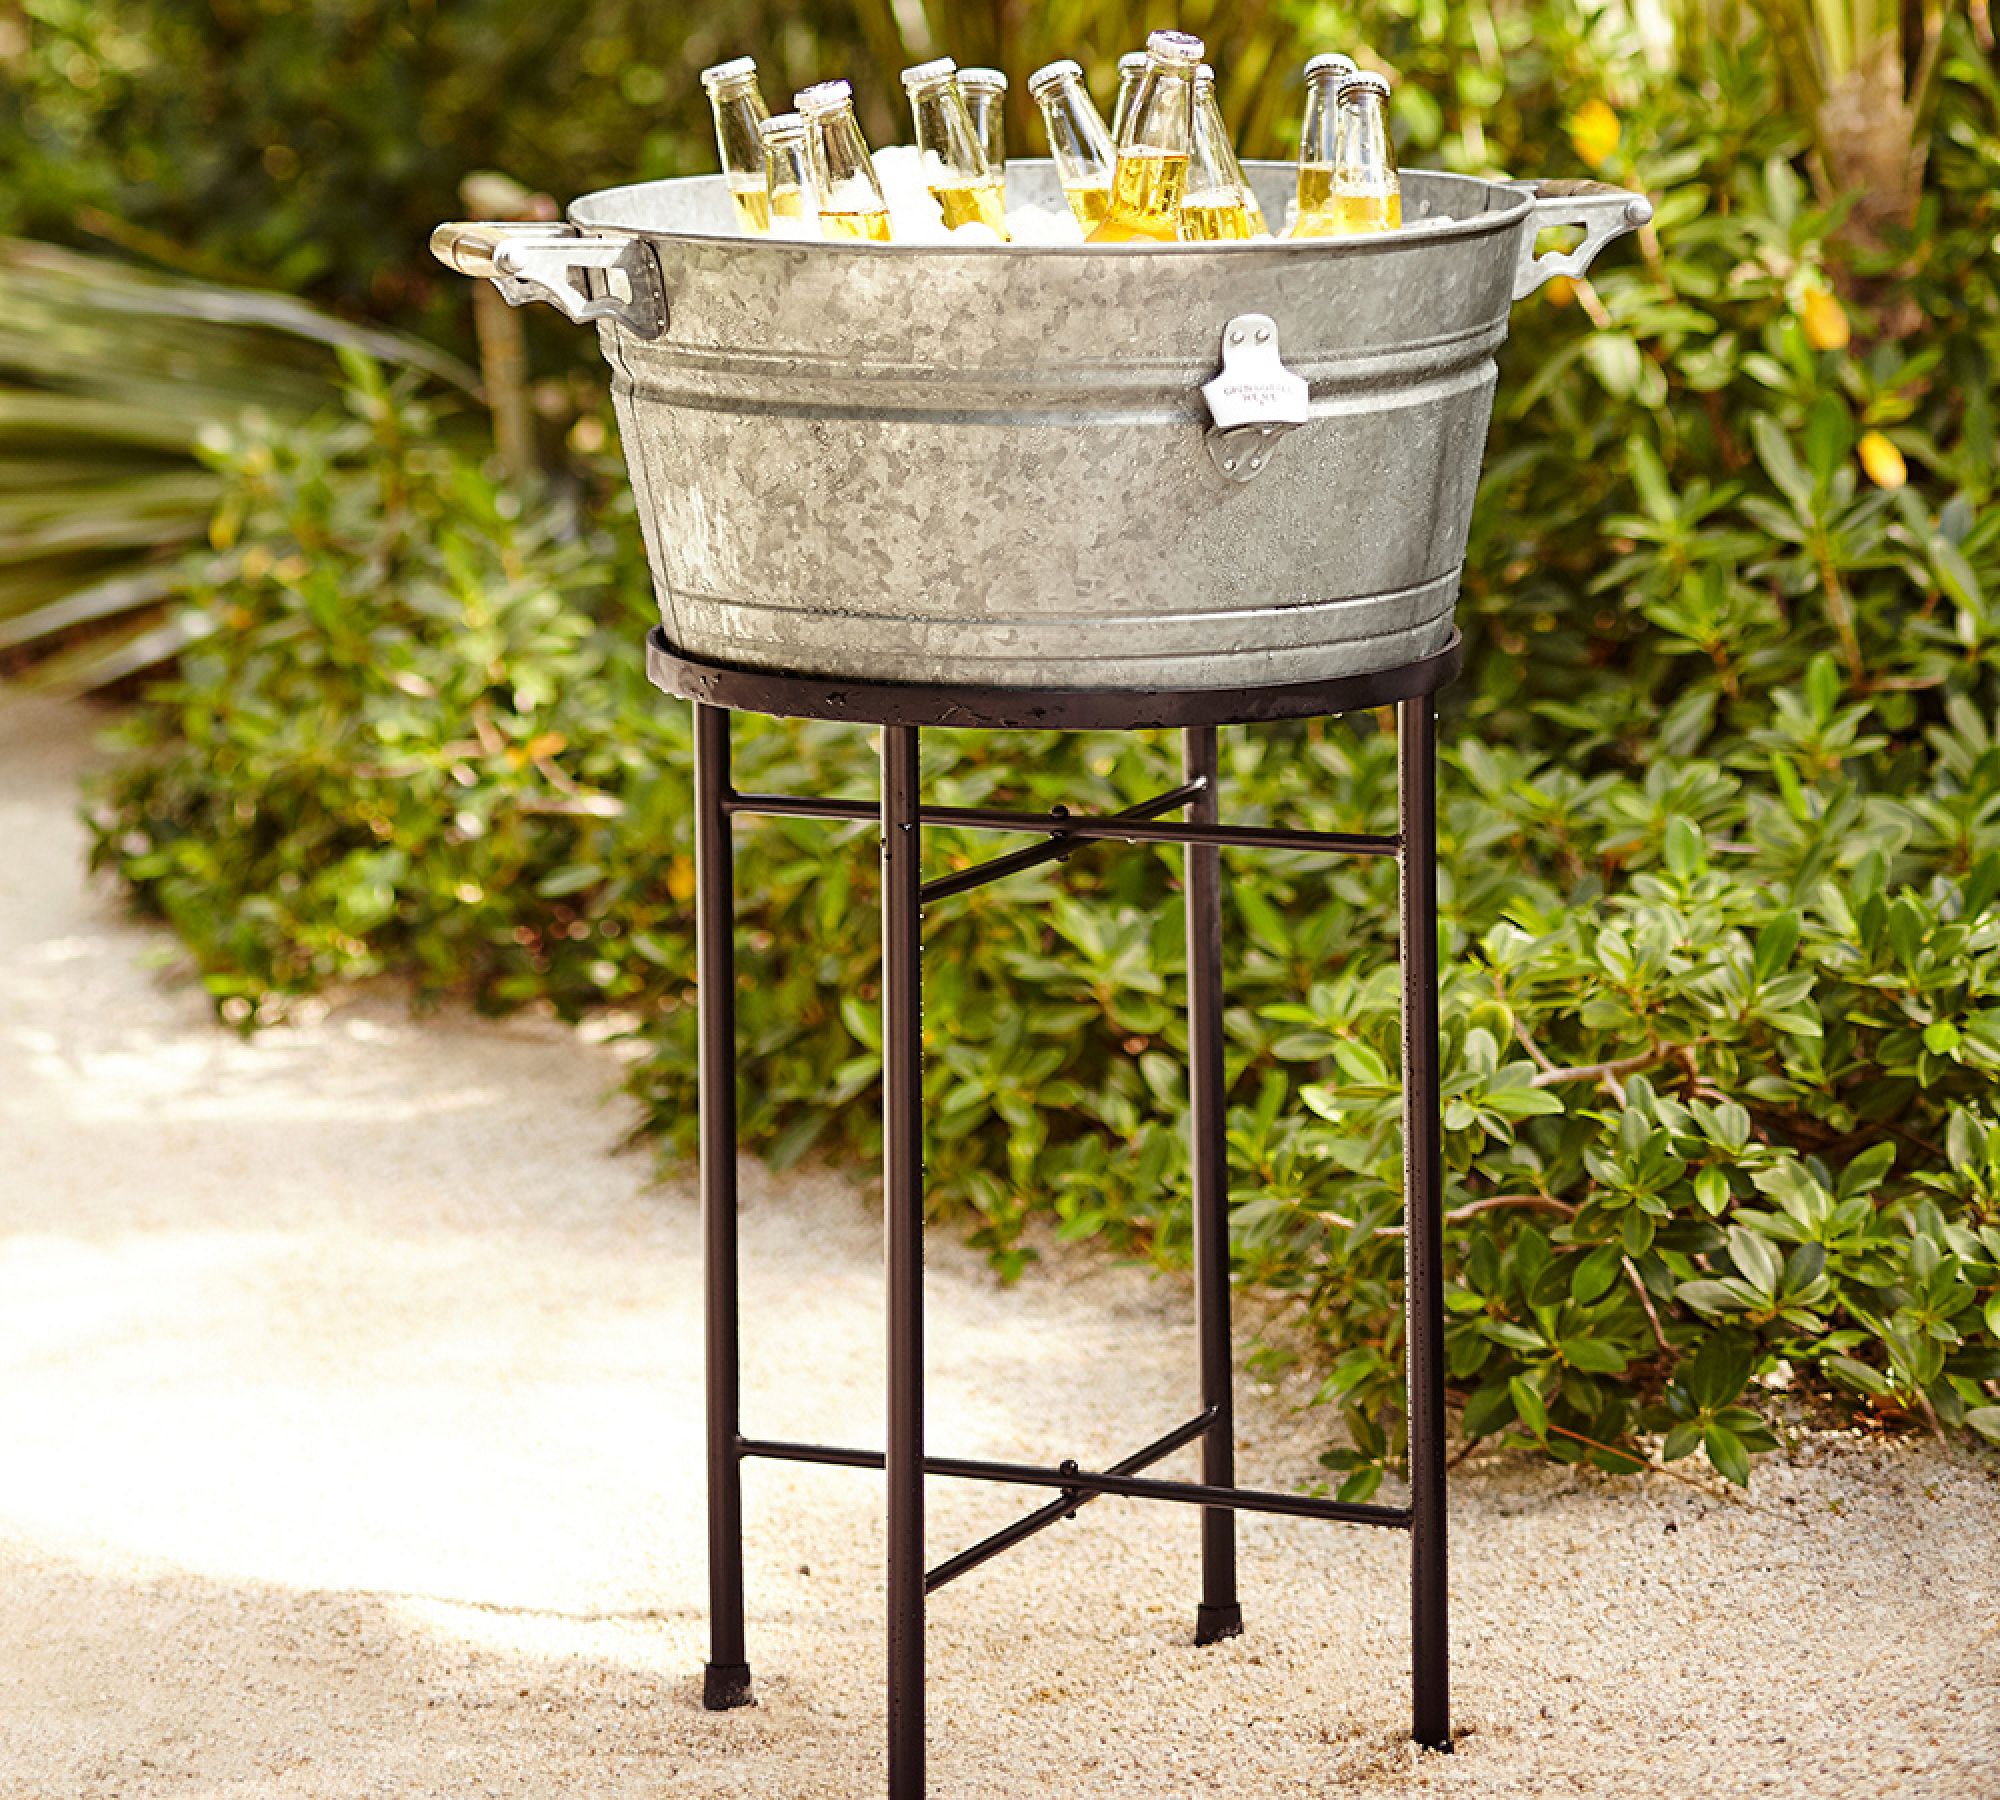 Galvanized Metal Party Bucket & Stand